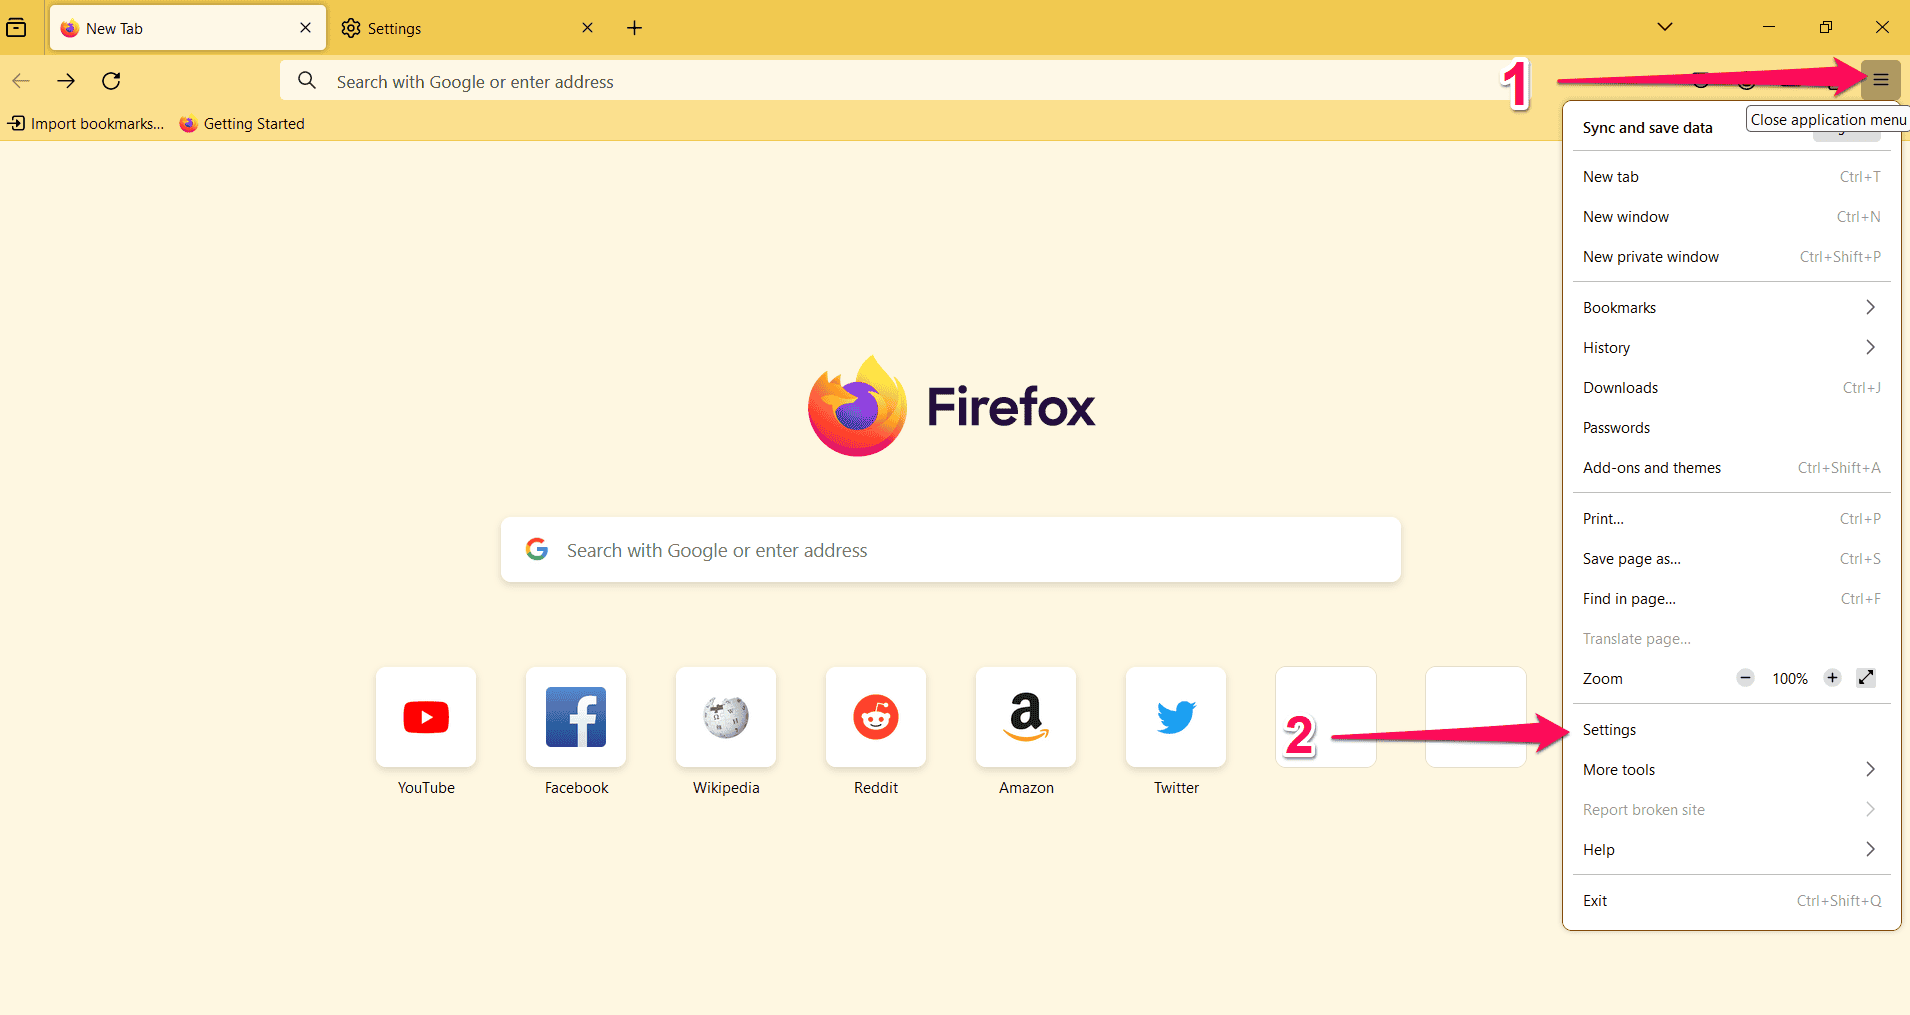 Accessing settings in Mozilla Firefox